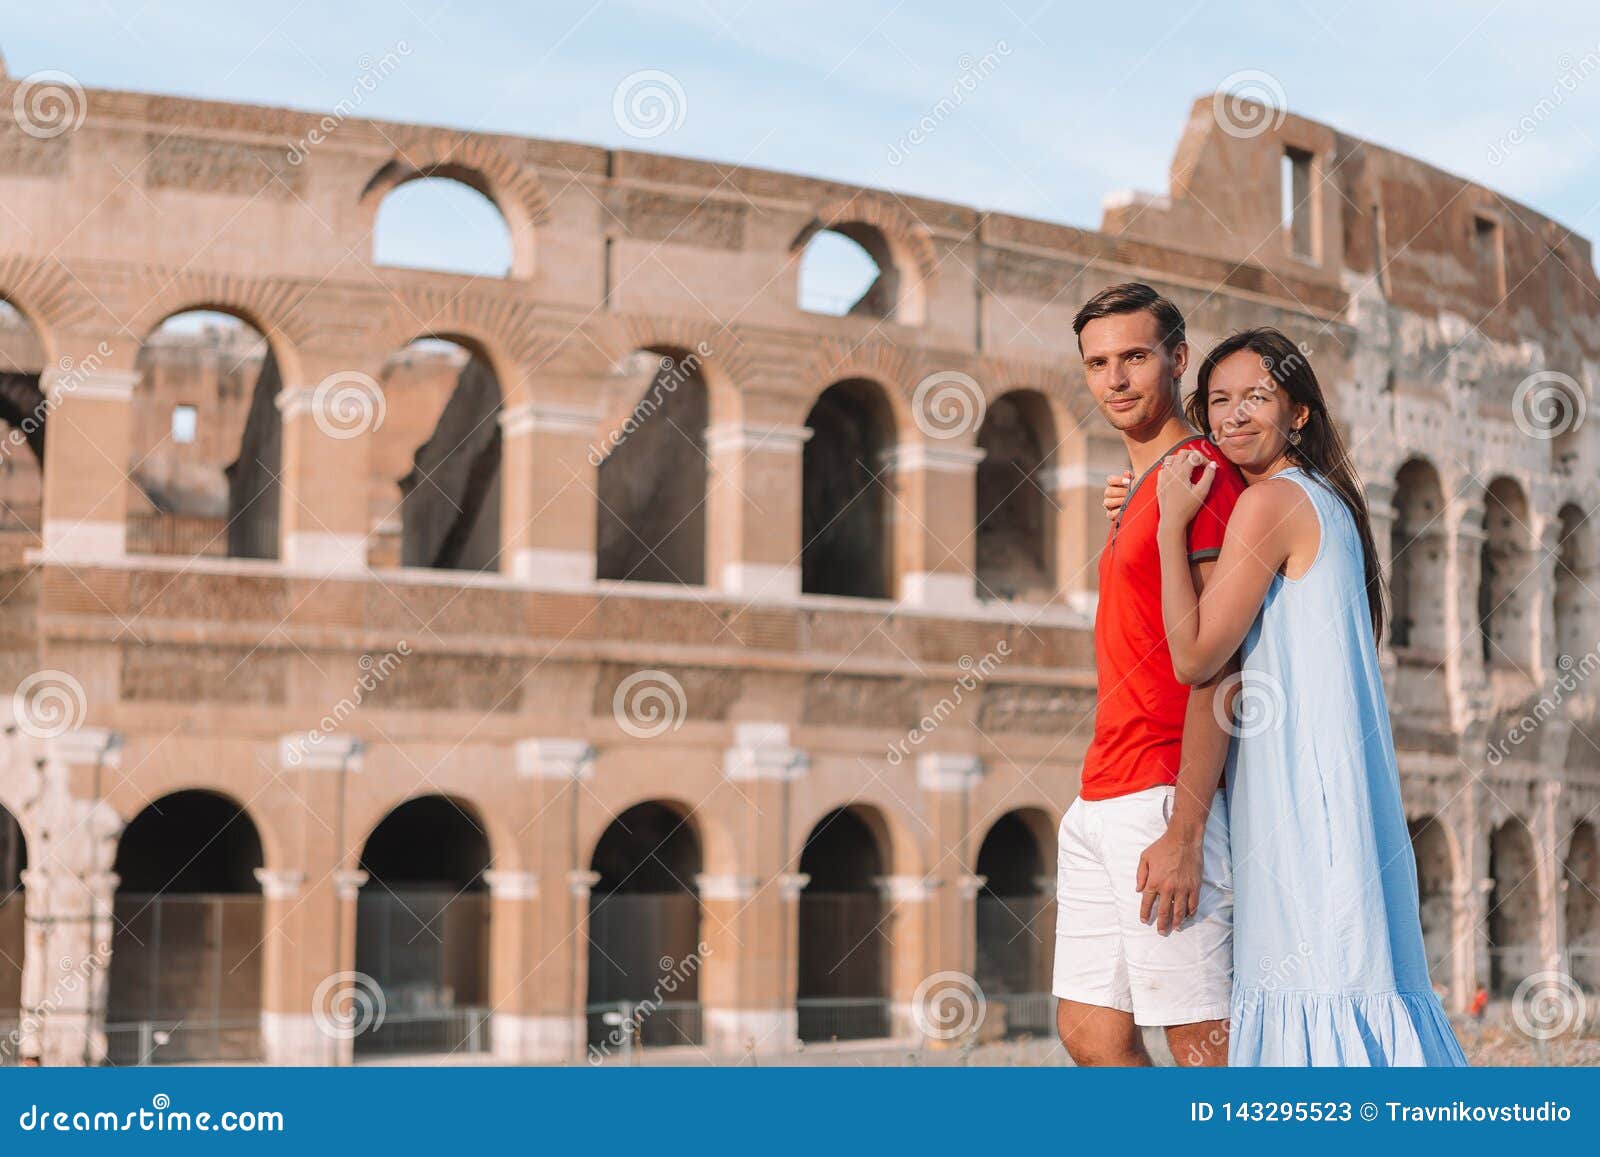 Dating Couple In Rome On A Nice Spring Day Stock Photo & More Pictures ...